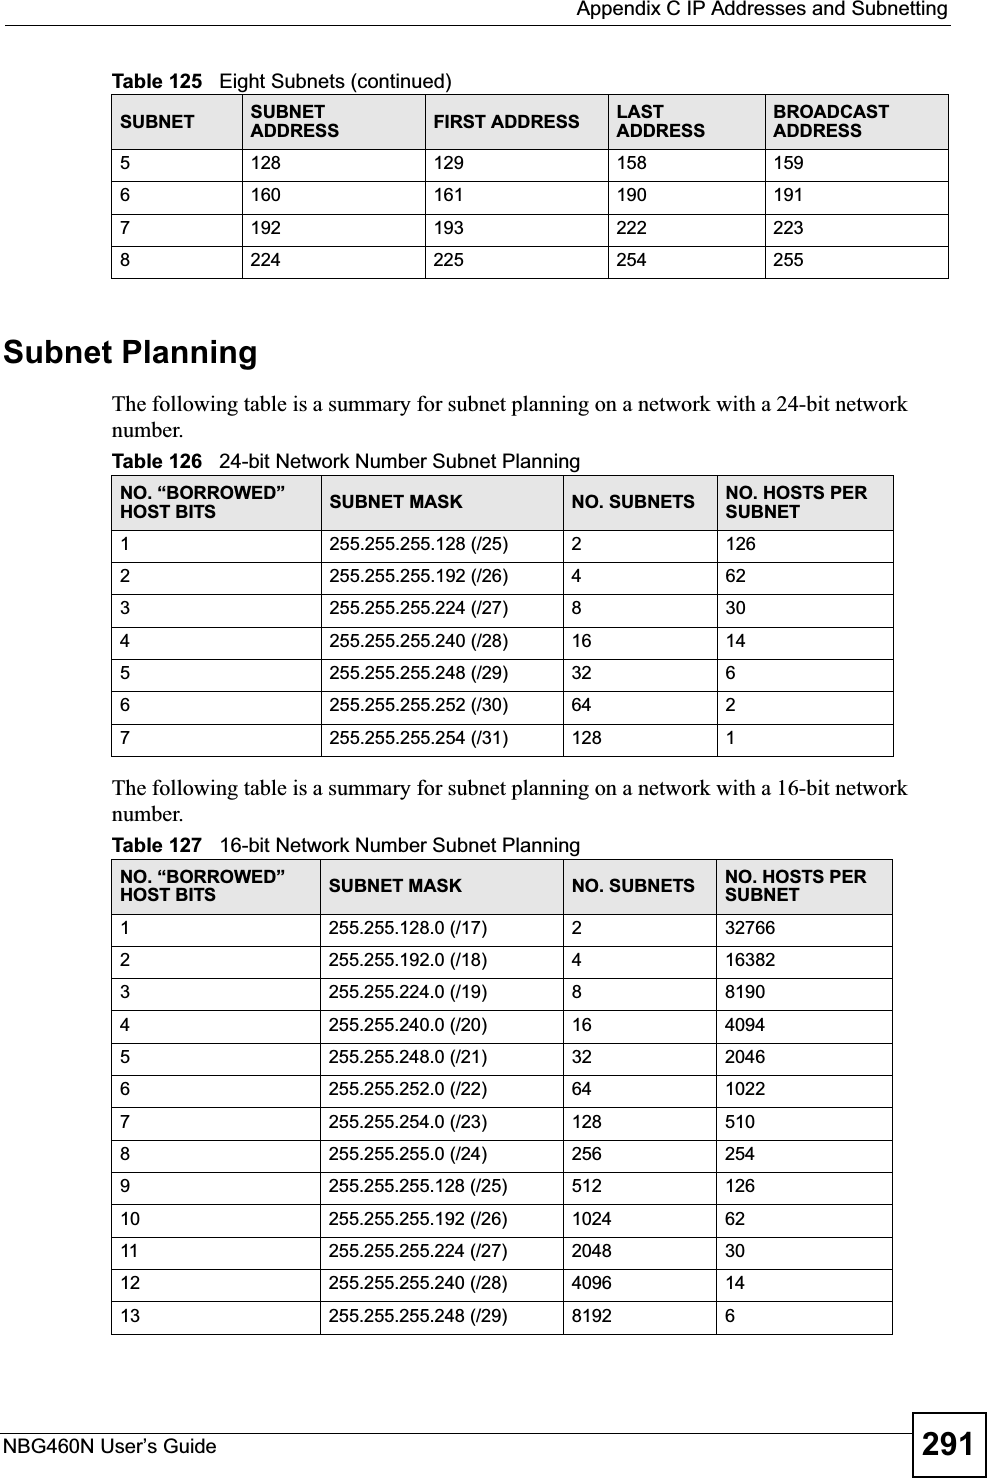  Appendix C IP Addresses and SubnettingNBG460N User’s Guide 291Subnet PlanningThe following table is a summary for subnet planning on a network with a 24-bit network number.The following table is a summary for subnet planning on a network with a 16-bit network number. 5128 129 158 1596160 161 190 1917192 193 222 2238224 225 254 255Table 125   Eight Subnets (continued)SUBNET SUBNETADDRESS FIRST ADDRESS LAST ADDRESSBROADCAST ADDRESSTable 126   24-bit Network Number Subnet PlanningNO. “BORROWED” HOST BITS SUBNET MASK NO. SUBNETS NO. HOSTS PER SUBNET1255.255.255.128 (/25) 21262255.255.255.192 (/26) 4623255.255.255.224 (/27) 8304255.255.255.240 (/28) 16 145255.255.255.248 (/29) 32 66255.255.255.252 (/30) 64 27255.255.255.254 (/31) 128 1Table 127   16-bit Network Number Subnet PlanningNO. “BORROWED” HOST BITS SUBNET MASK NO. SUBNETS NO. HOSTS PER SUBNET1255.255.128.0 (/17) 2327662255.255.192.0 (/18) 4163823255.255.224.0 (/19) 881904255.255.240.0 (/20) 16 40945255.255.248.0 (/21) 32 20466255.255.252.0 (/22) 64 10227255.255.254.0 (/23) 128 5108255.255.255.0 (/24) 256 2549255.255.255.128 (/25) 512 12610 255.255.255.192 (/26) 1024 6211 255.255.255.224 (/27) 2048 3012 255.255.255.240 (/28) 4096 1413 255.255.255.248 (/29) 8192 6